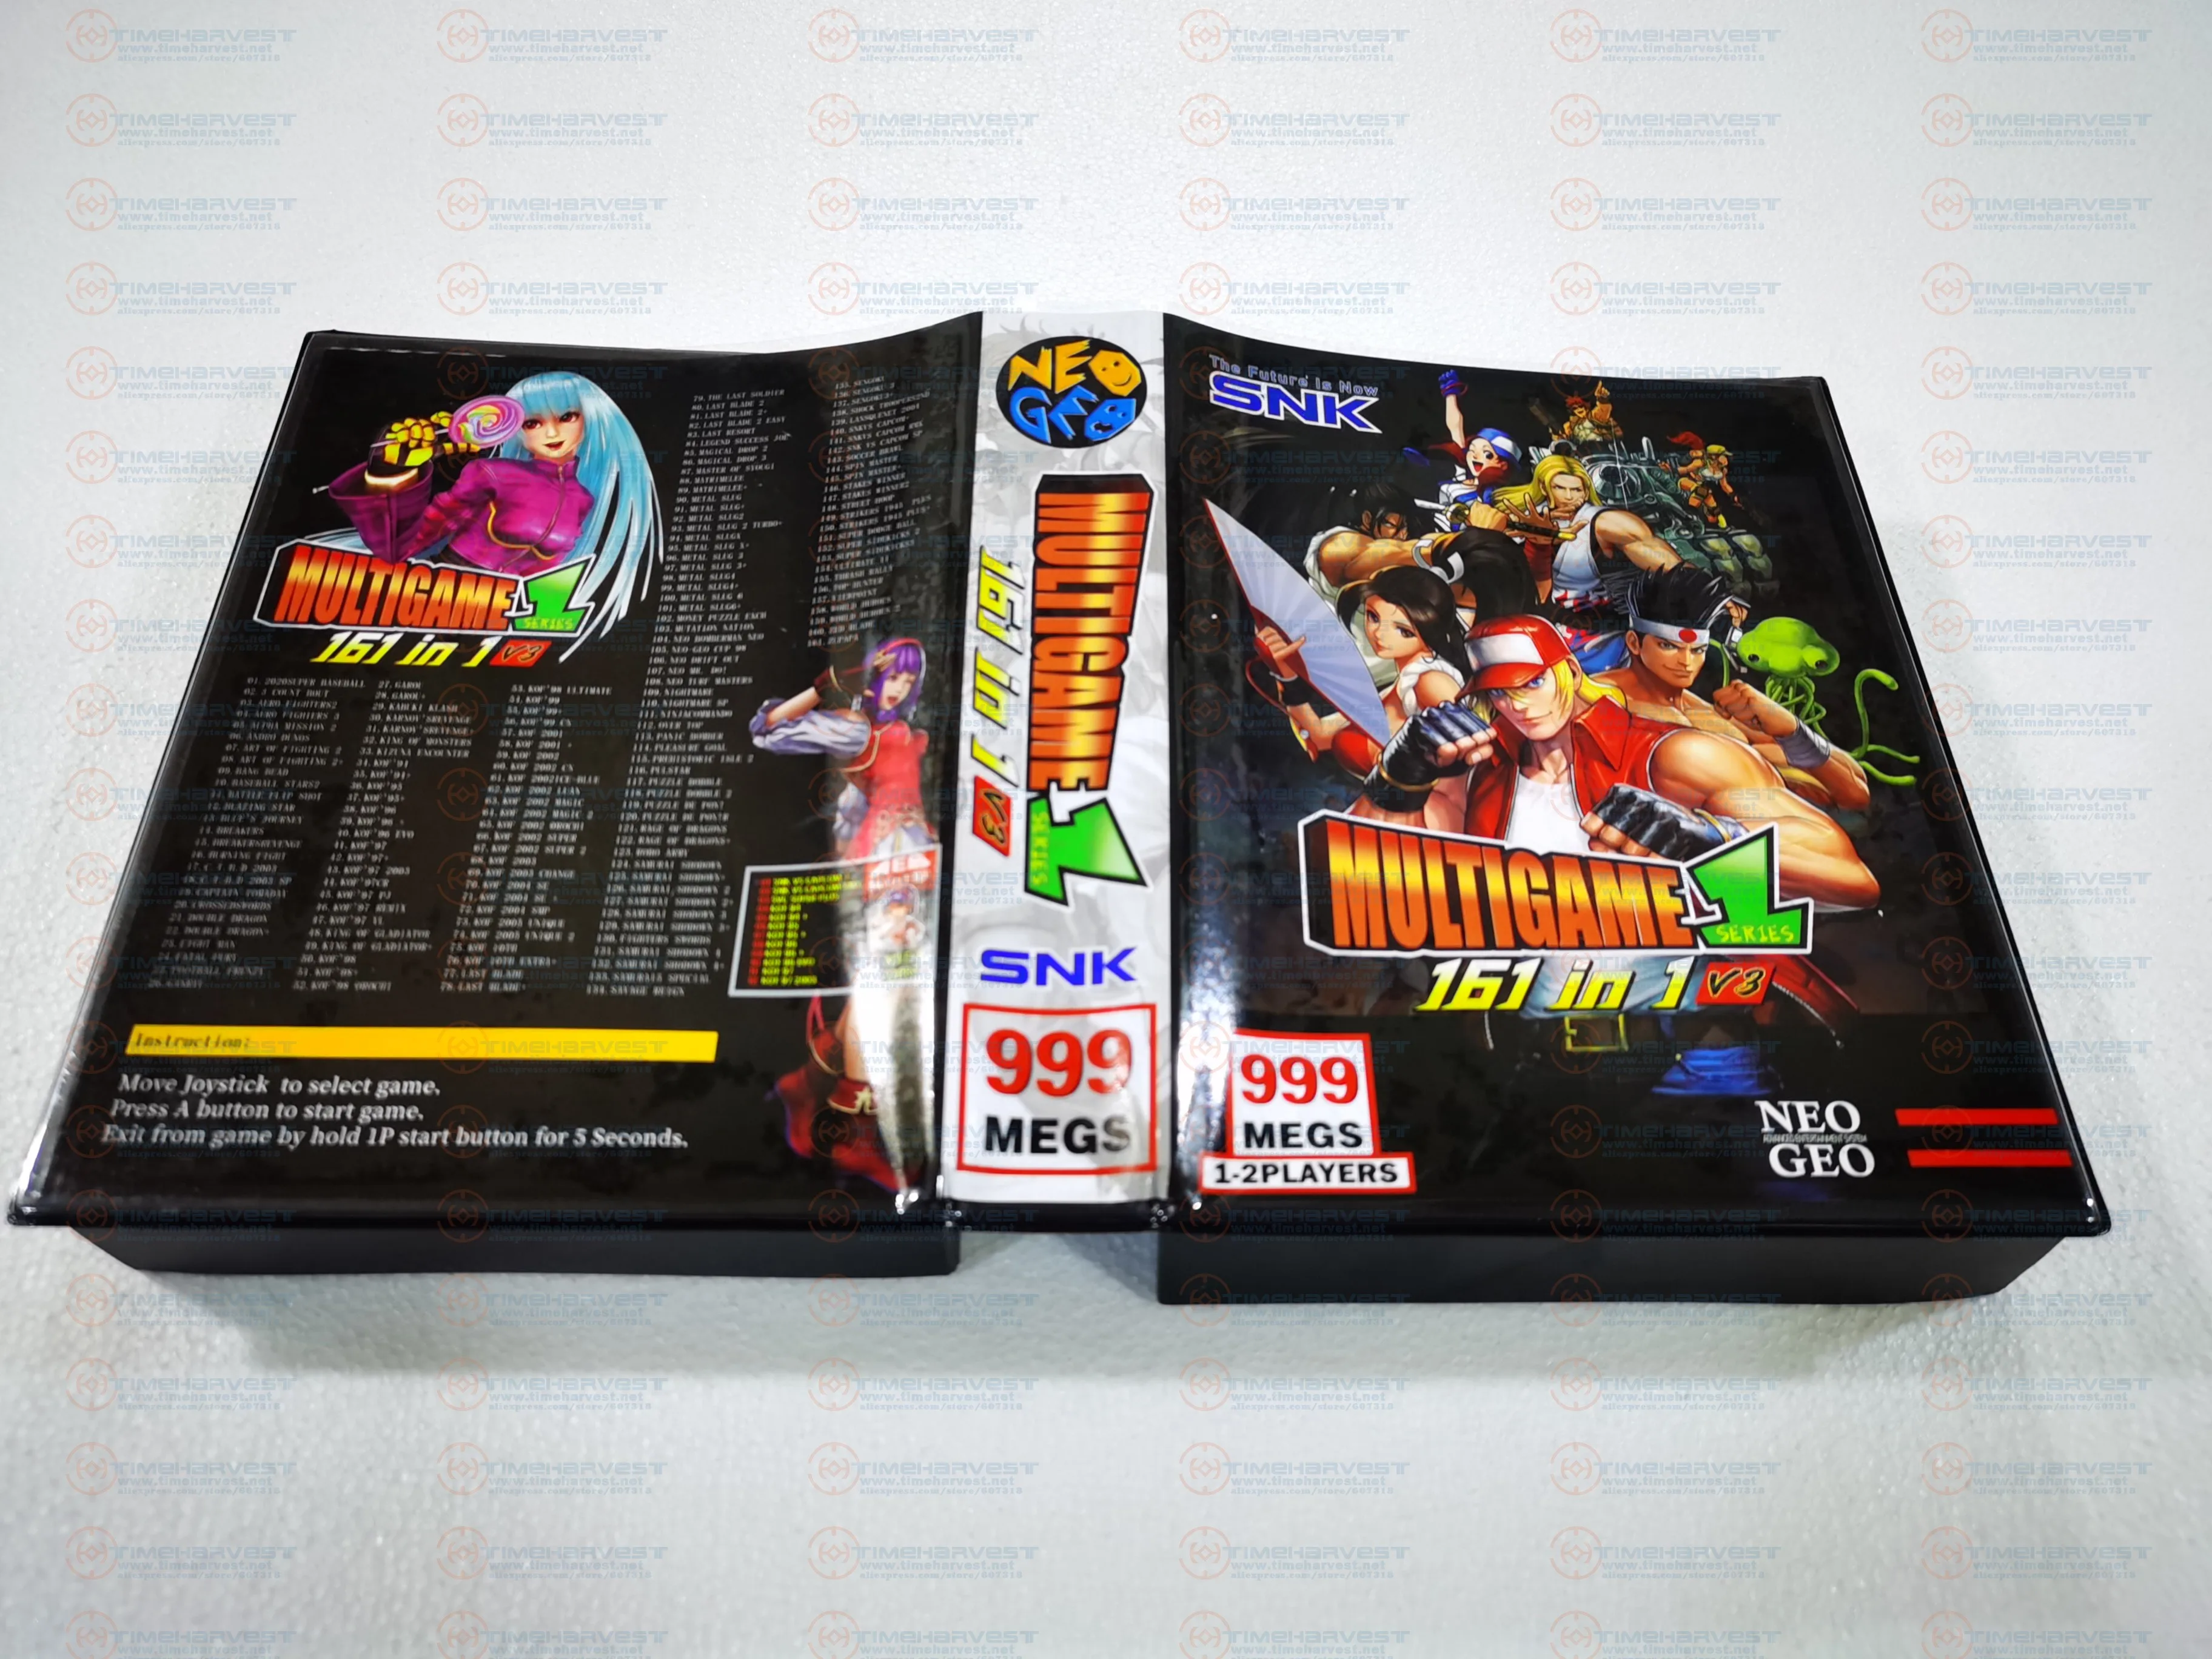 Neo Geo AES Shockbox Retro Arcade Cartridge Protection Case Shockboxes with Art Cover for Original AES Game Card MVS Cartridge